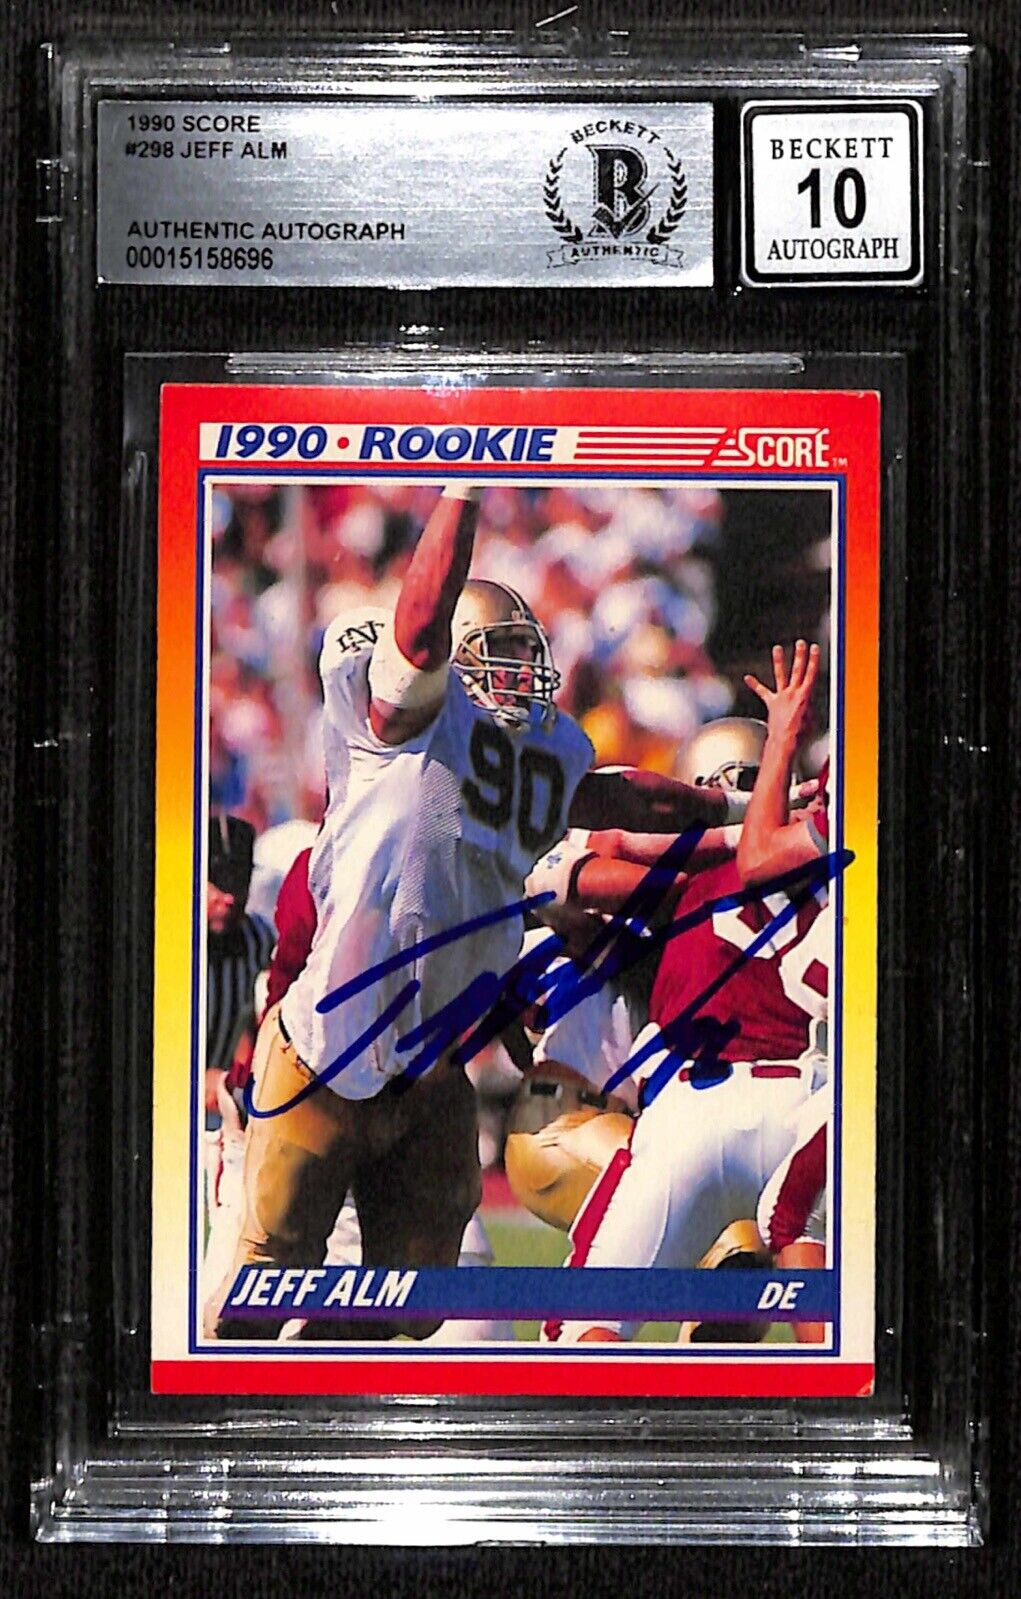 1990 Score Football #298 Jeff Alm Signed Autographed Rookie Card BECKETT Auto 10